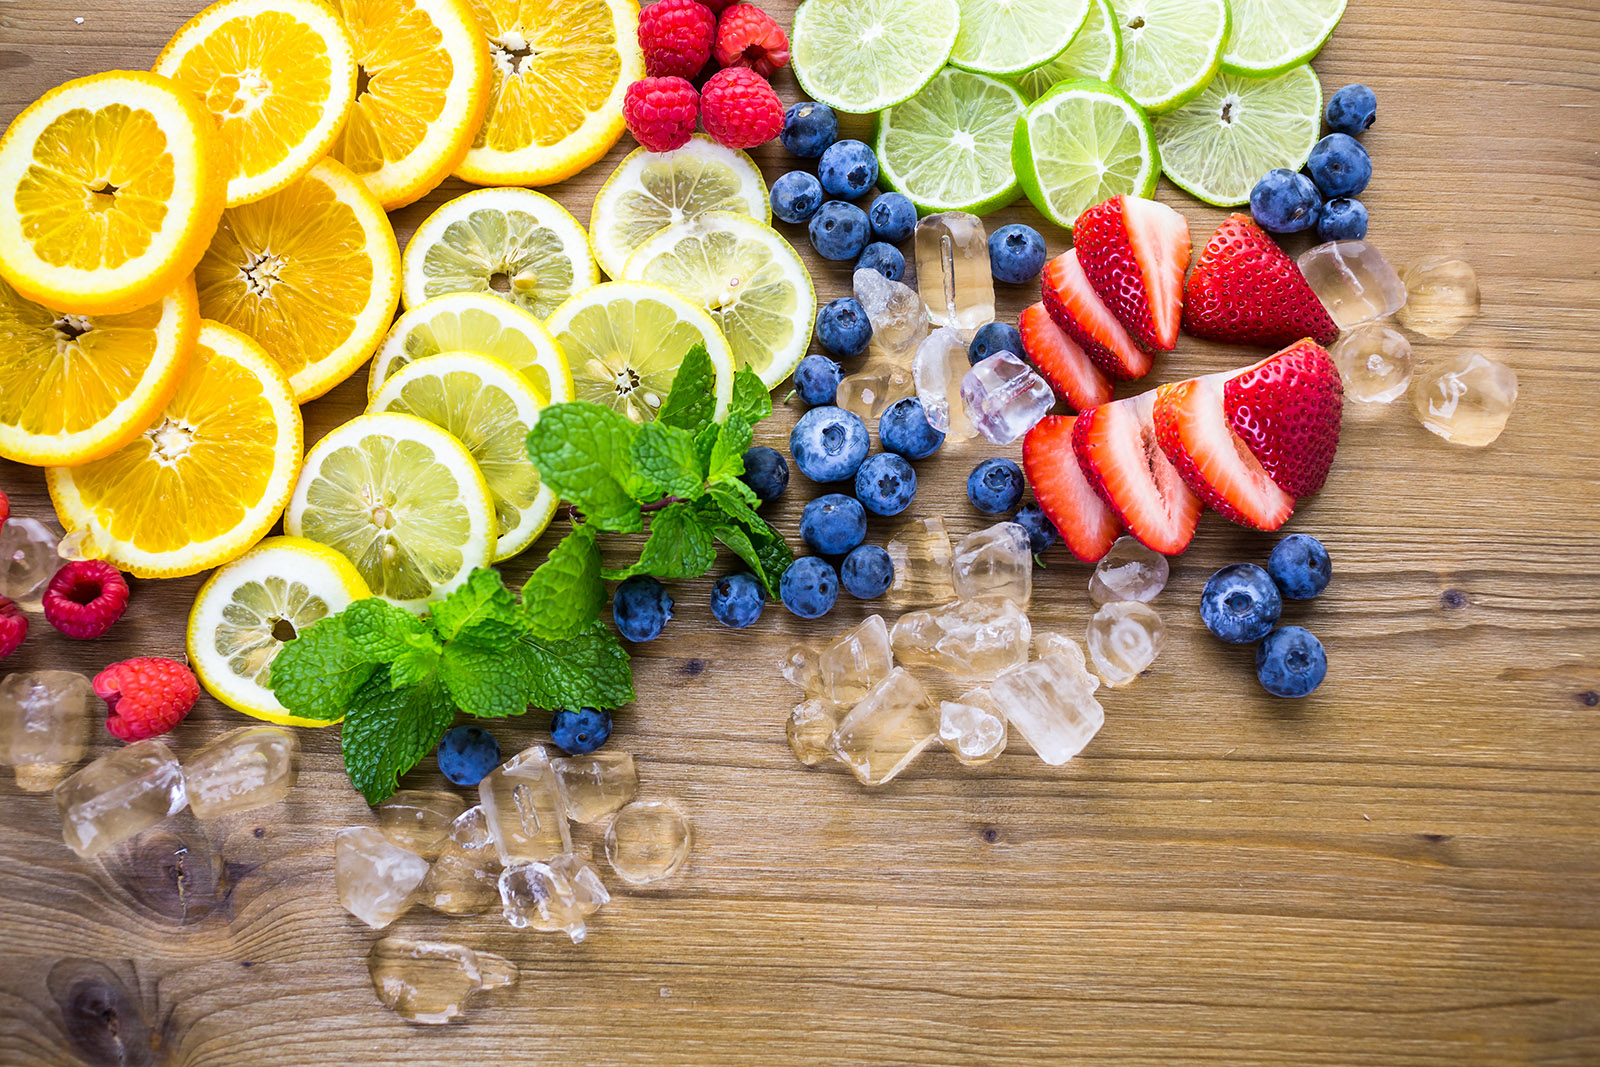 fruits with vitamins that help manage health with vitamin infusions